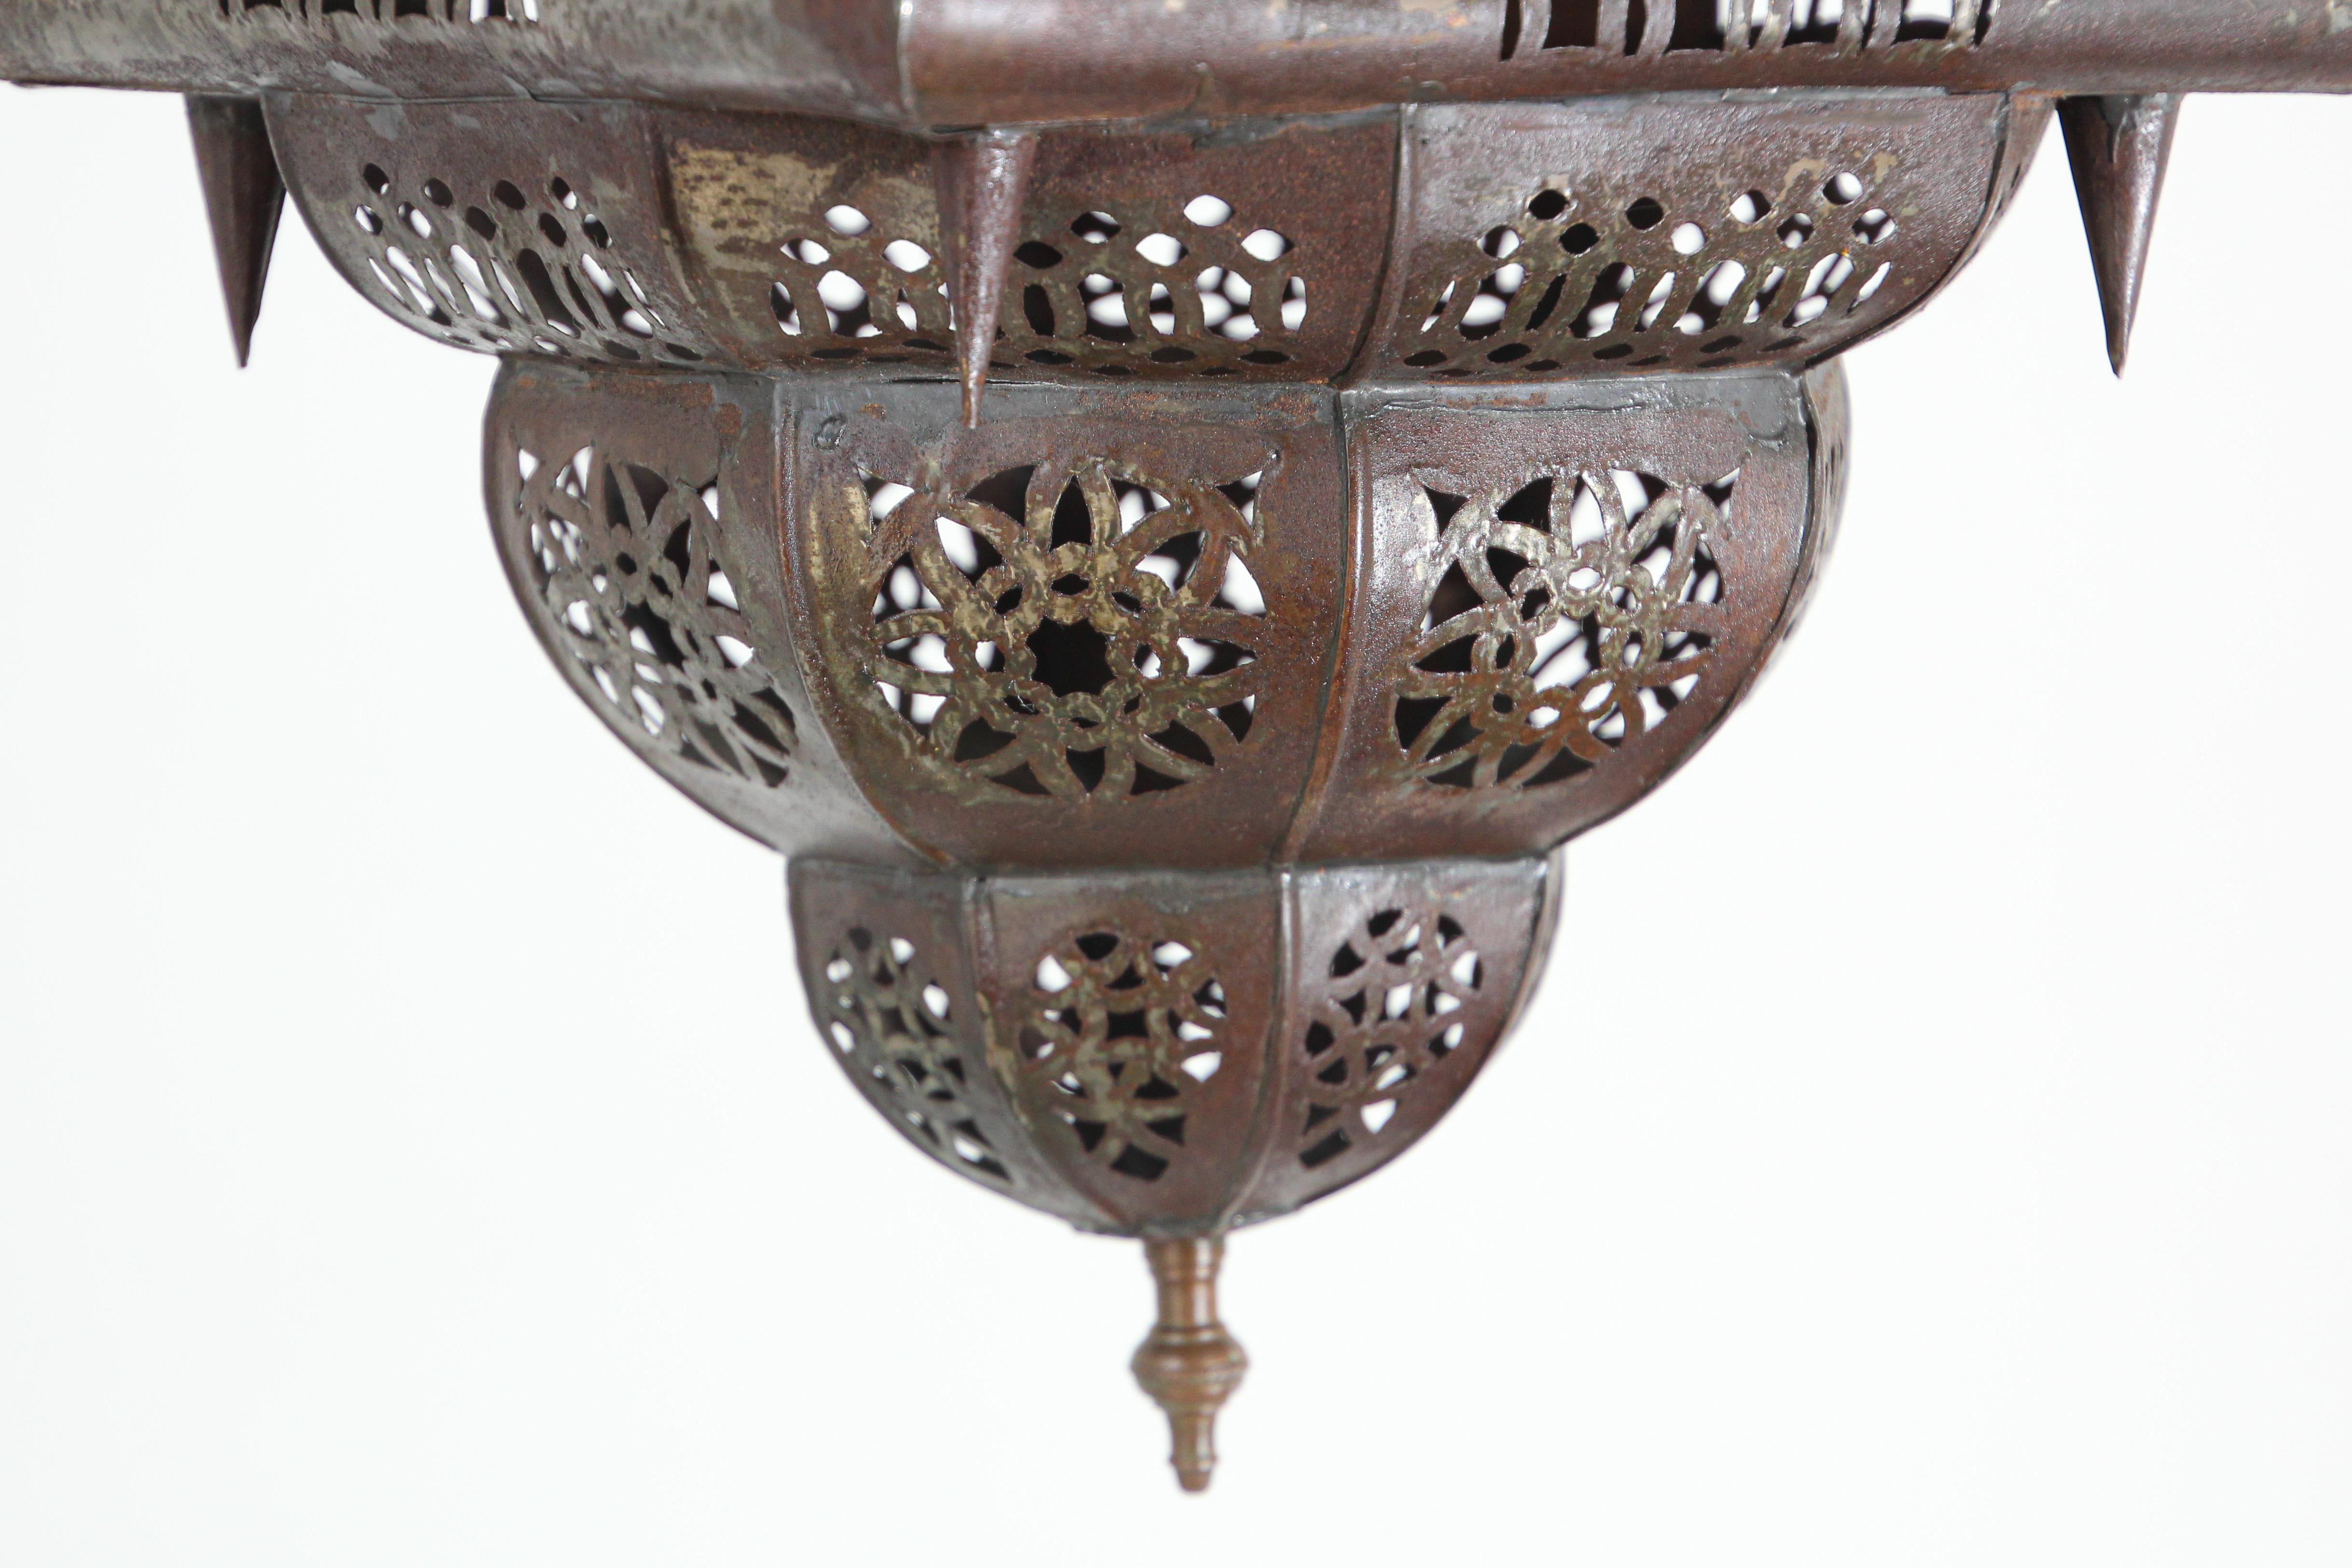 Vintage Moroccan Handcrafted Lantern Ceiling Light with Multi-Color Glass In Good Condition For Sale In North Hollywood, CA